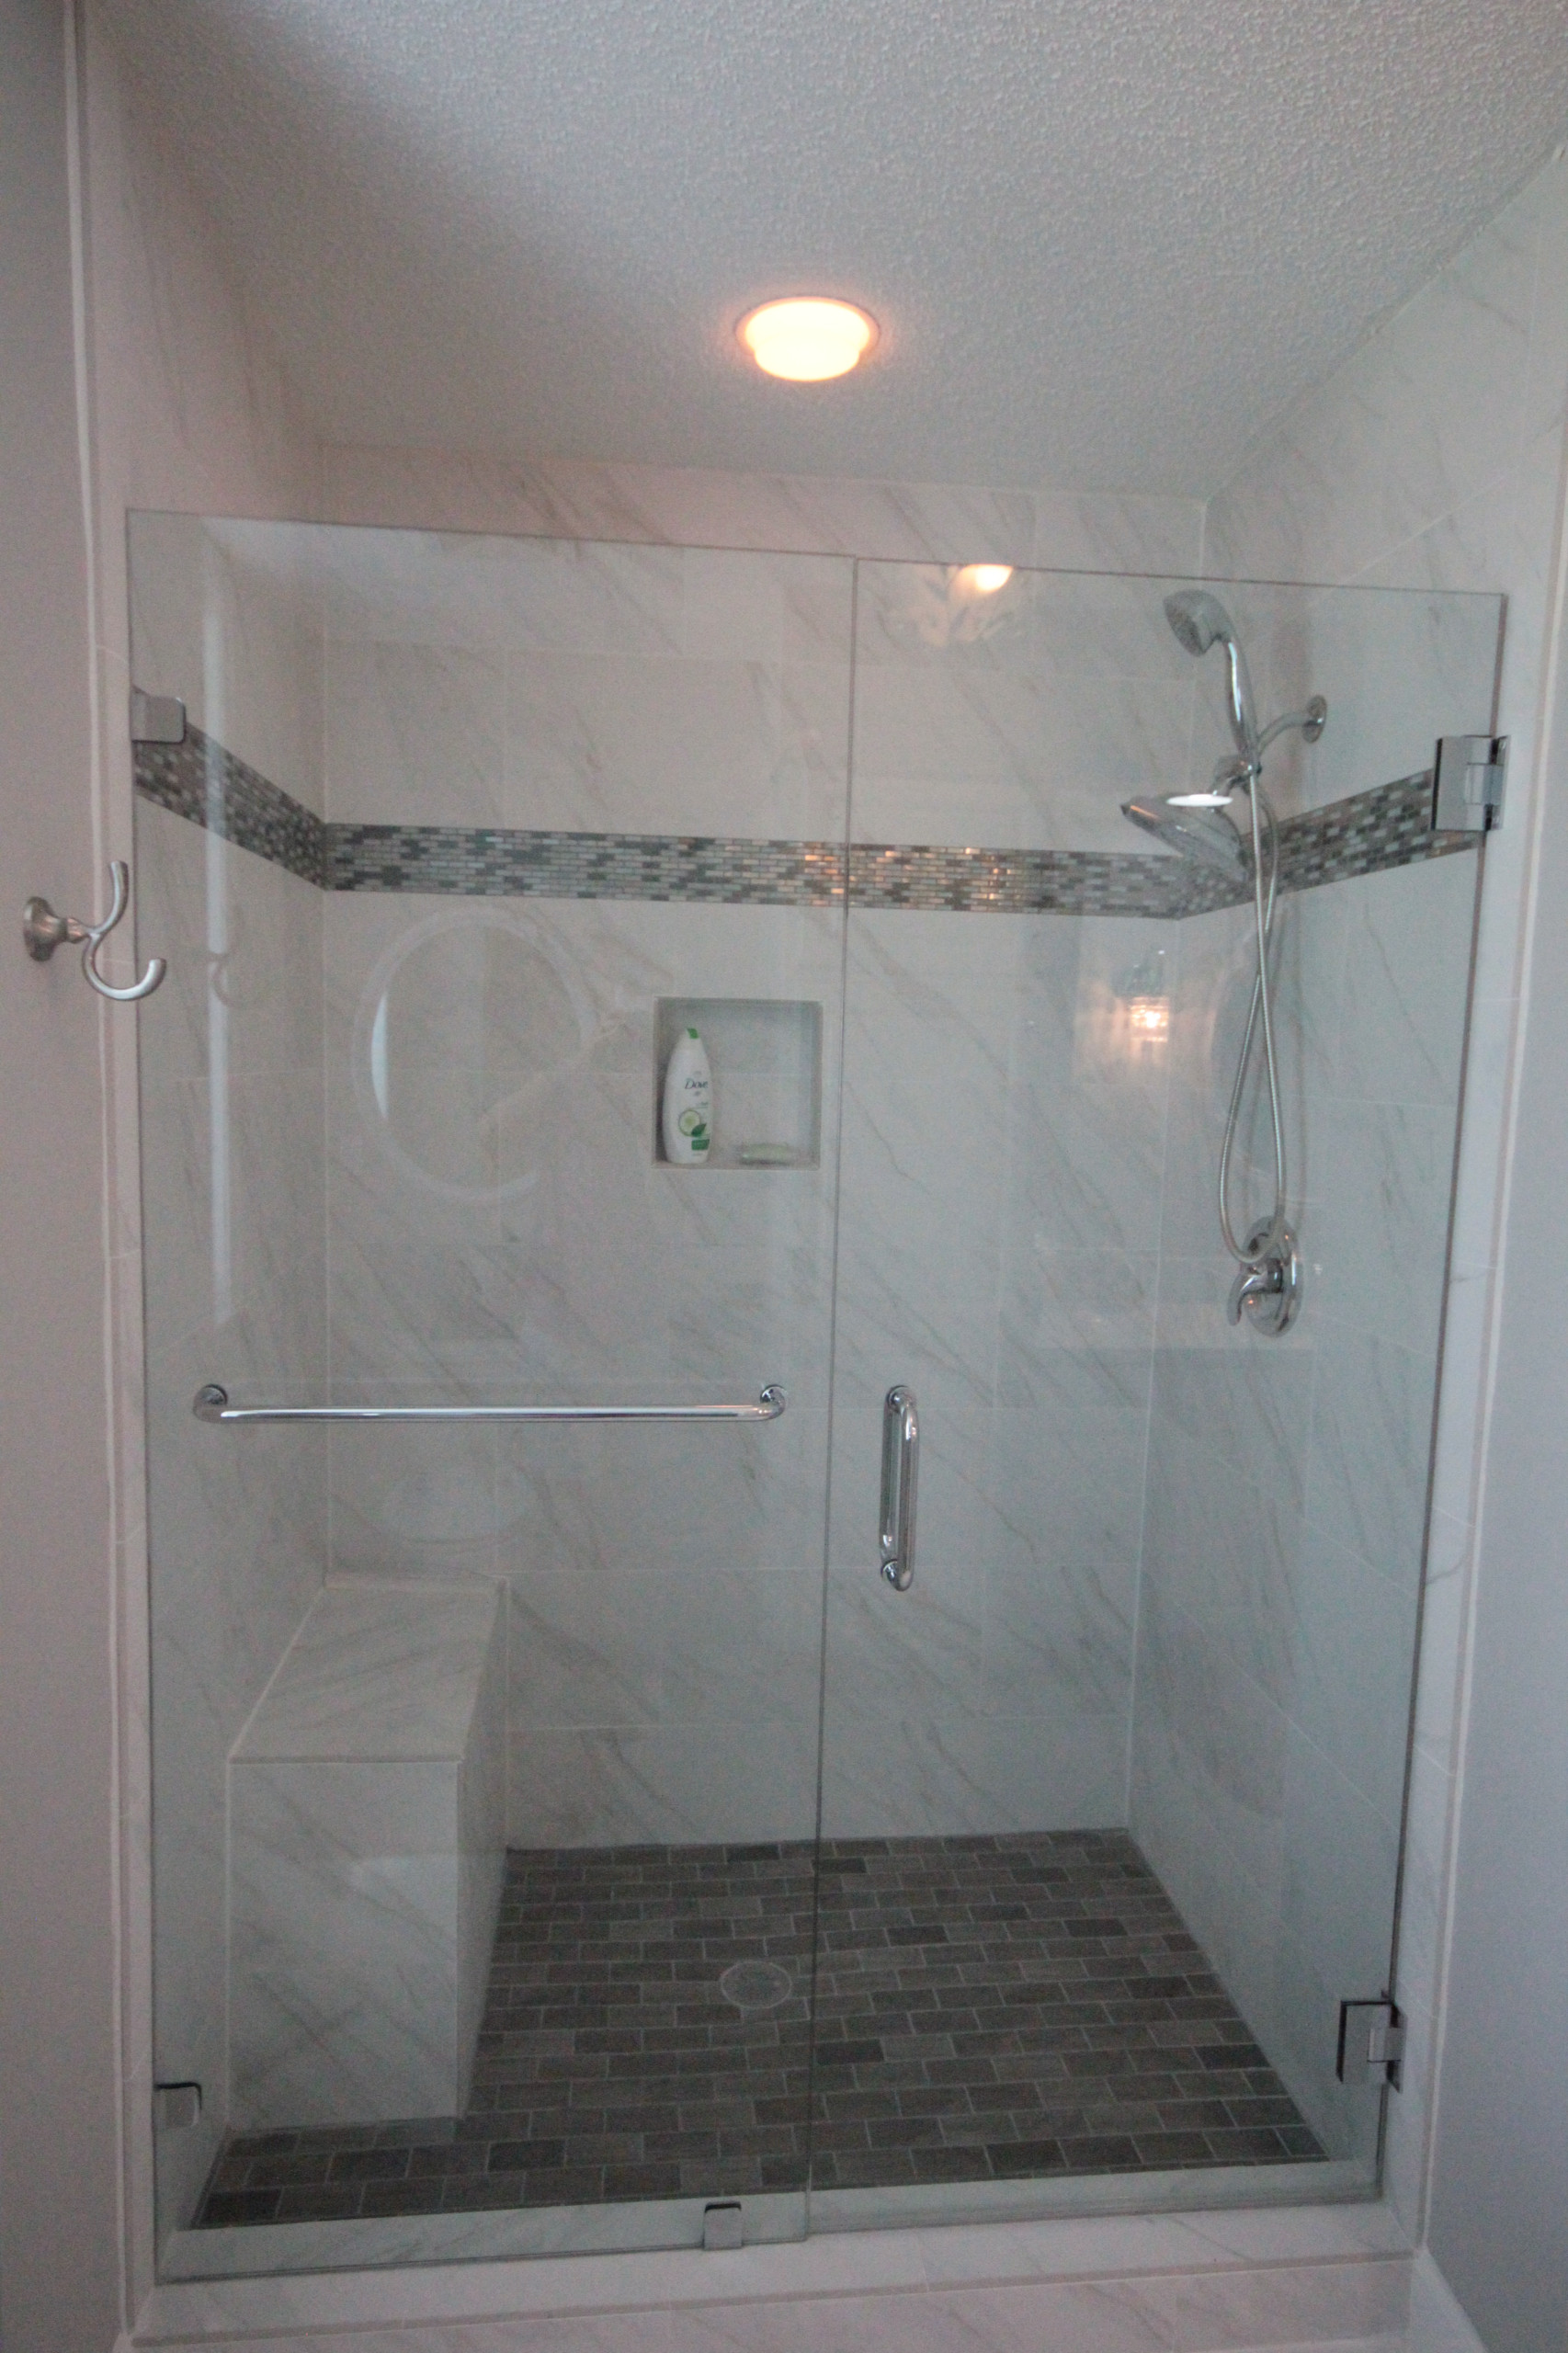 New shower with marble-look tile.